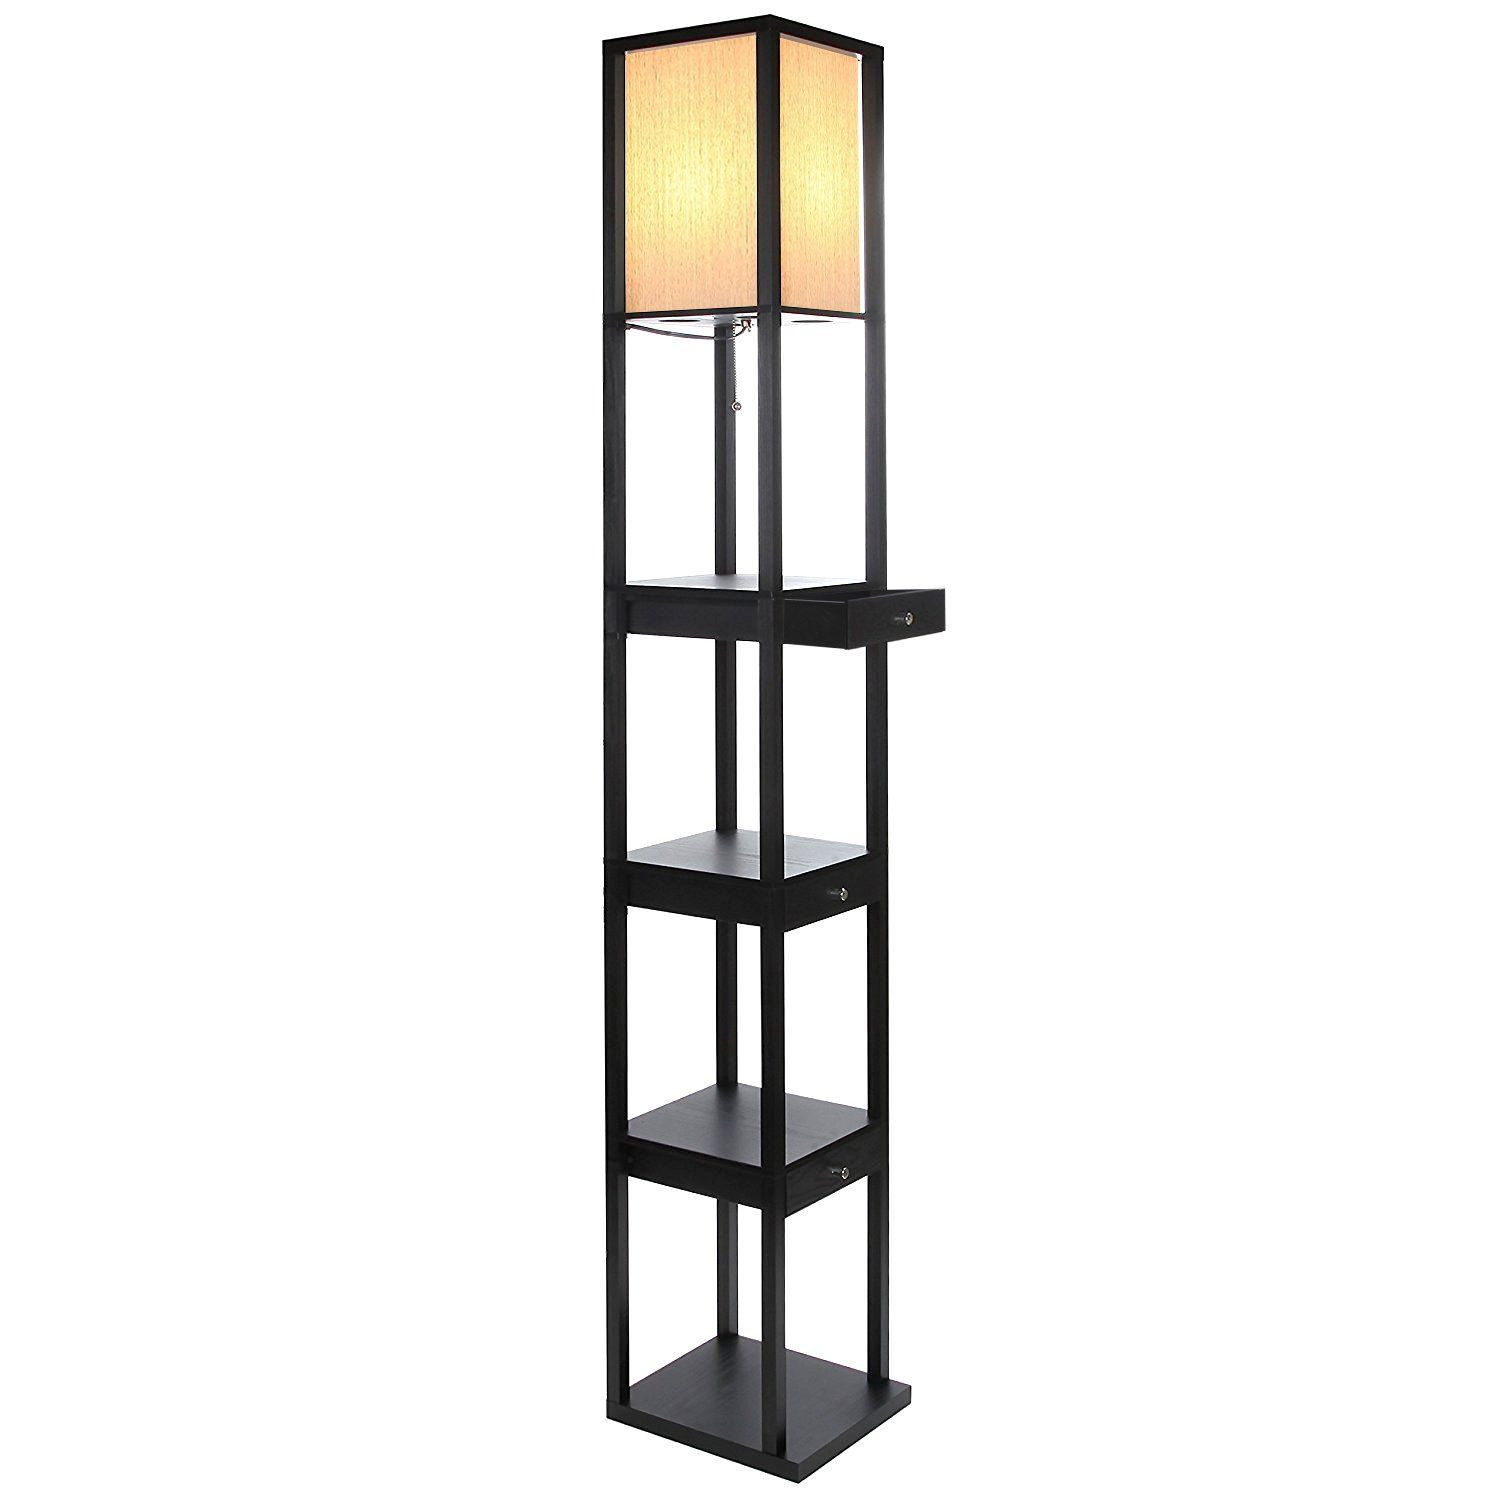 bamboo vases wholesale of 15 best of lamps floor contemporary wonderfull lighting world with brightech maxwell led drawer edition shelf floor lamp modern asian